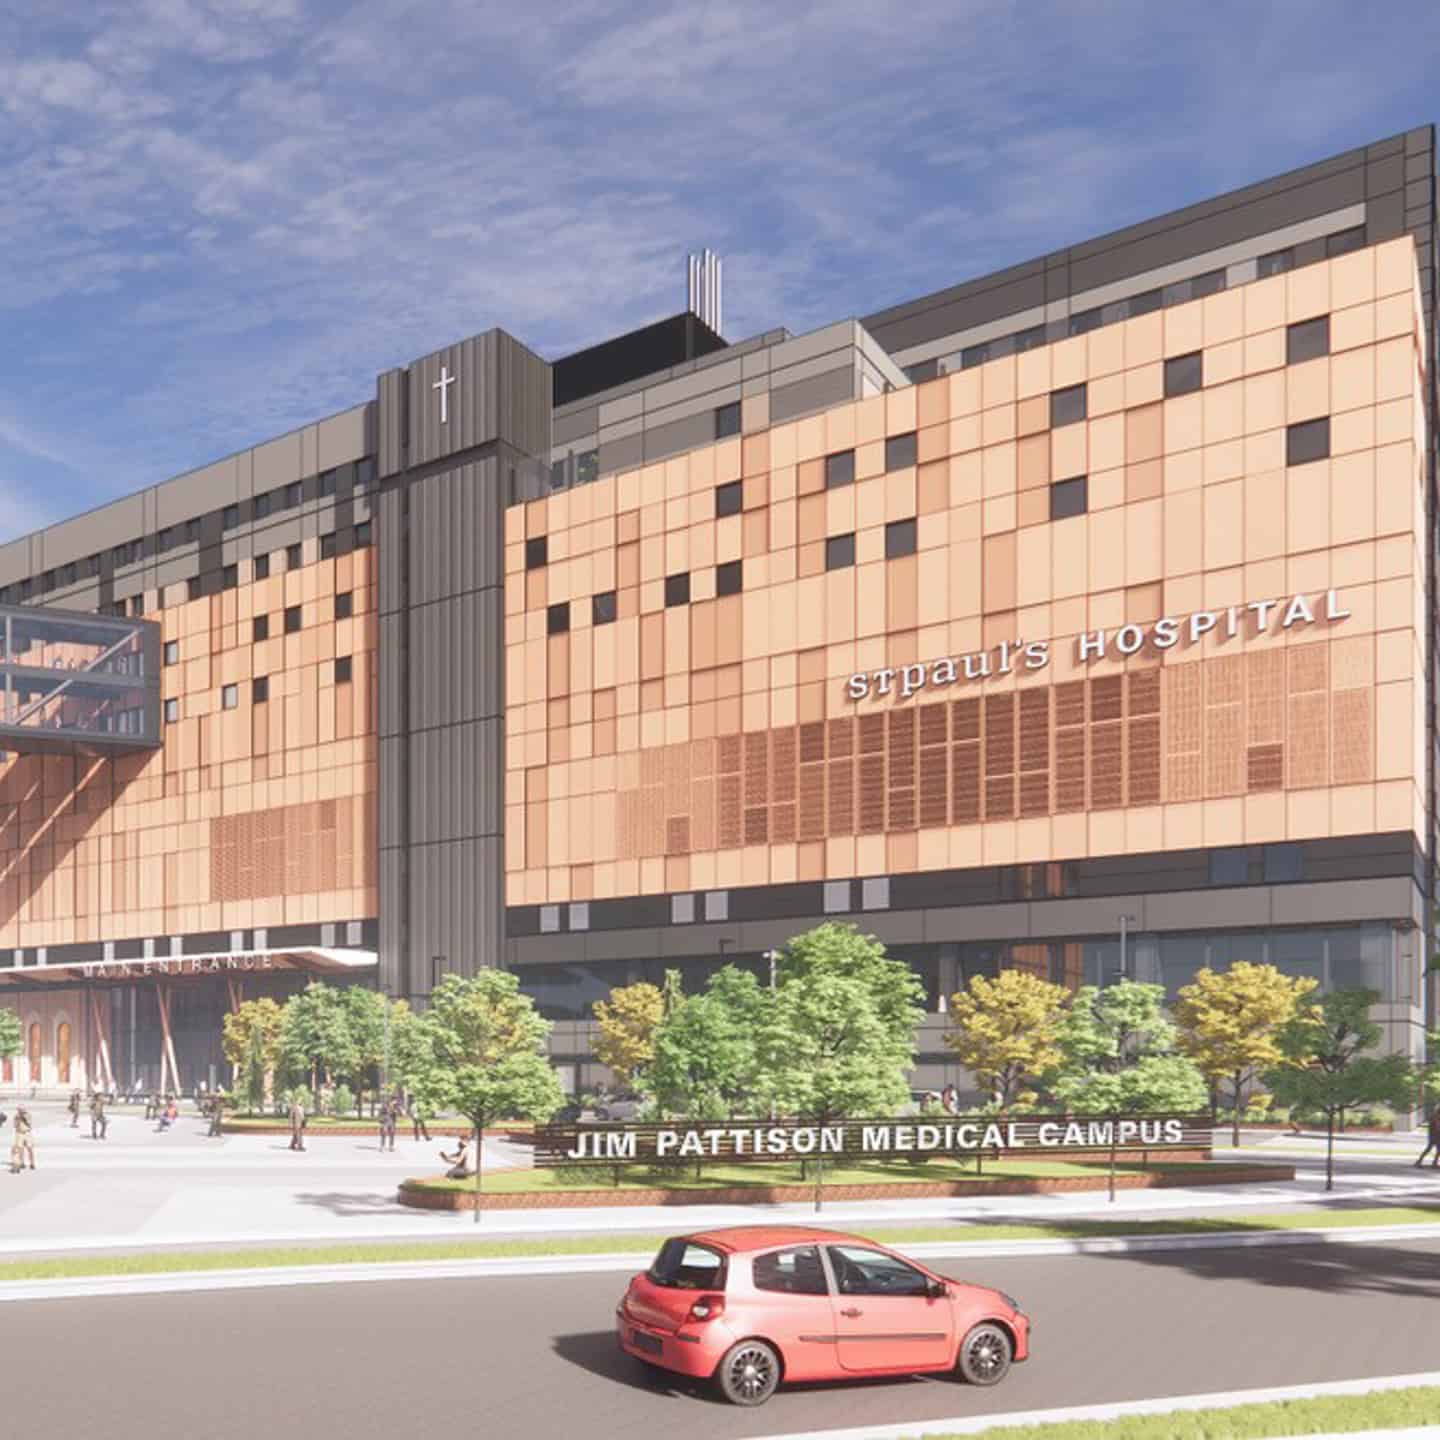 Rendering of the new St. Paul's Hospital on the Jim Pattison Medical Campus.